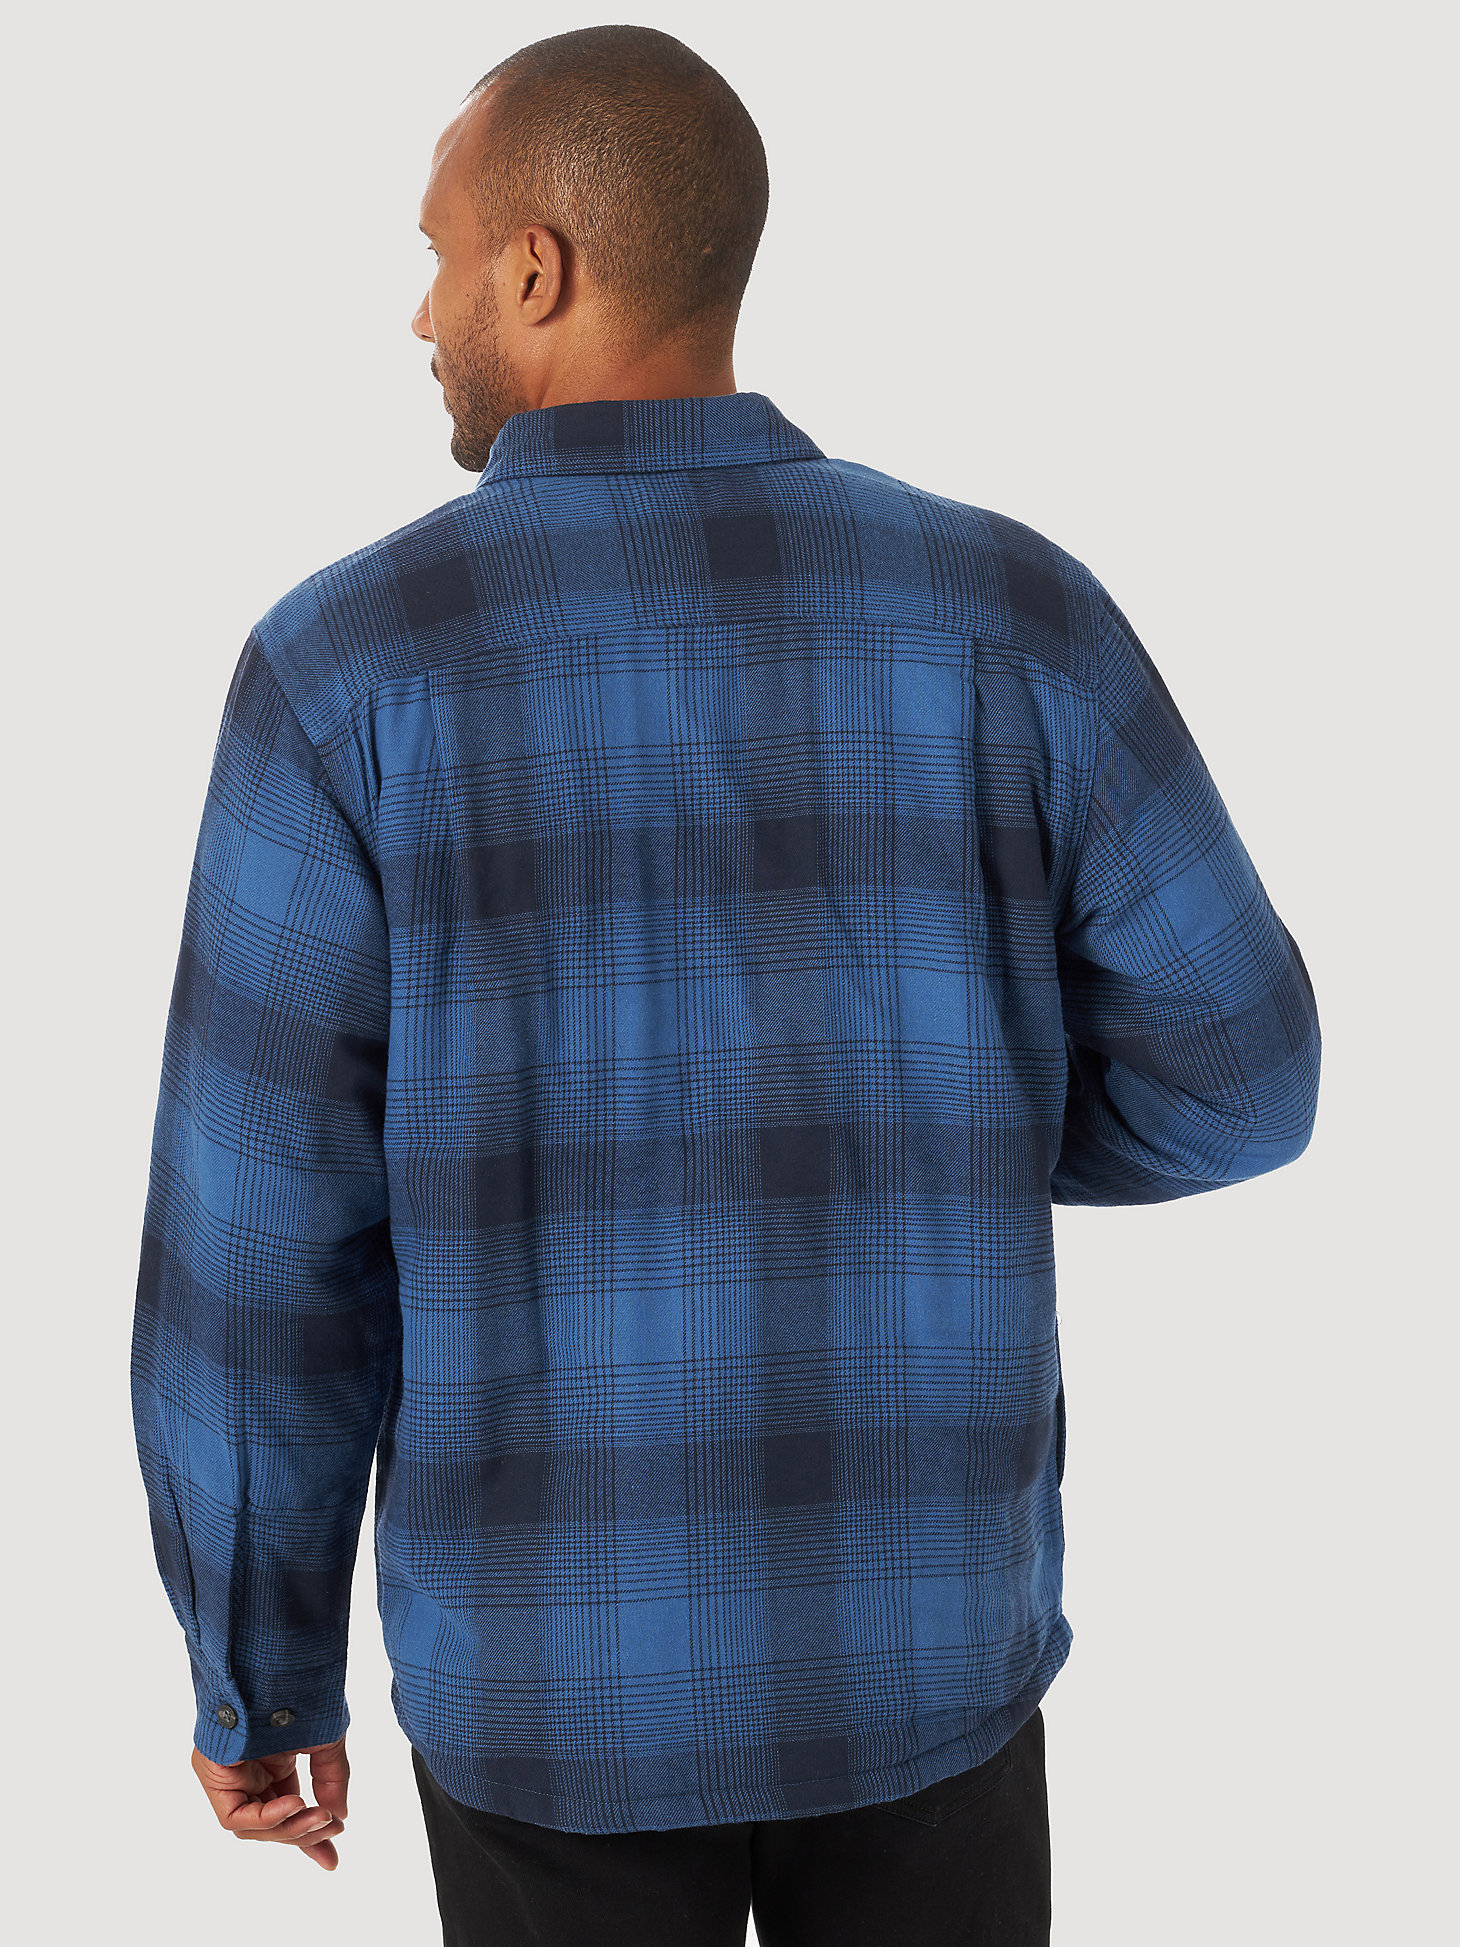 Men's Wrangler® Authentics Sherpa Lined Flannel Shirt in Blue alternative view 1